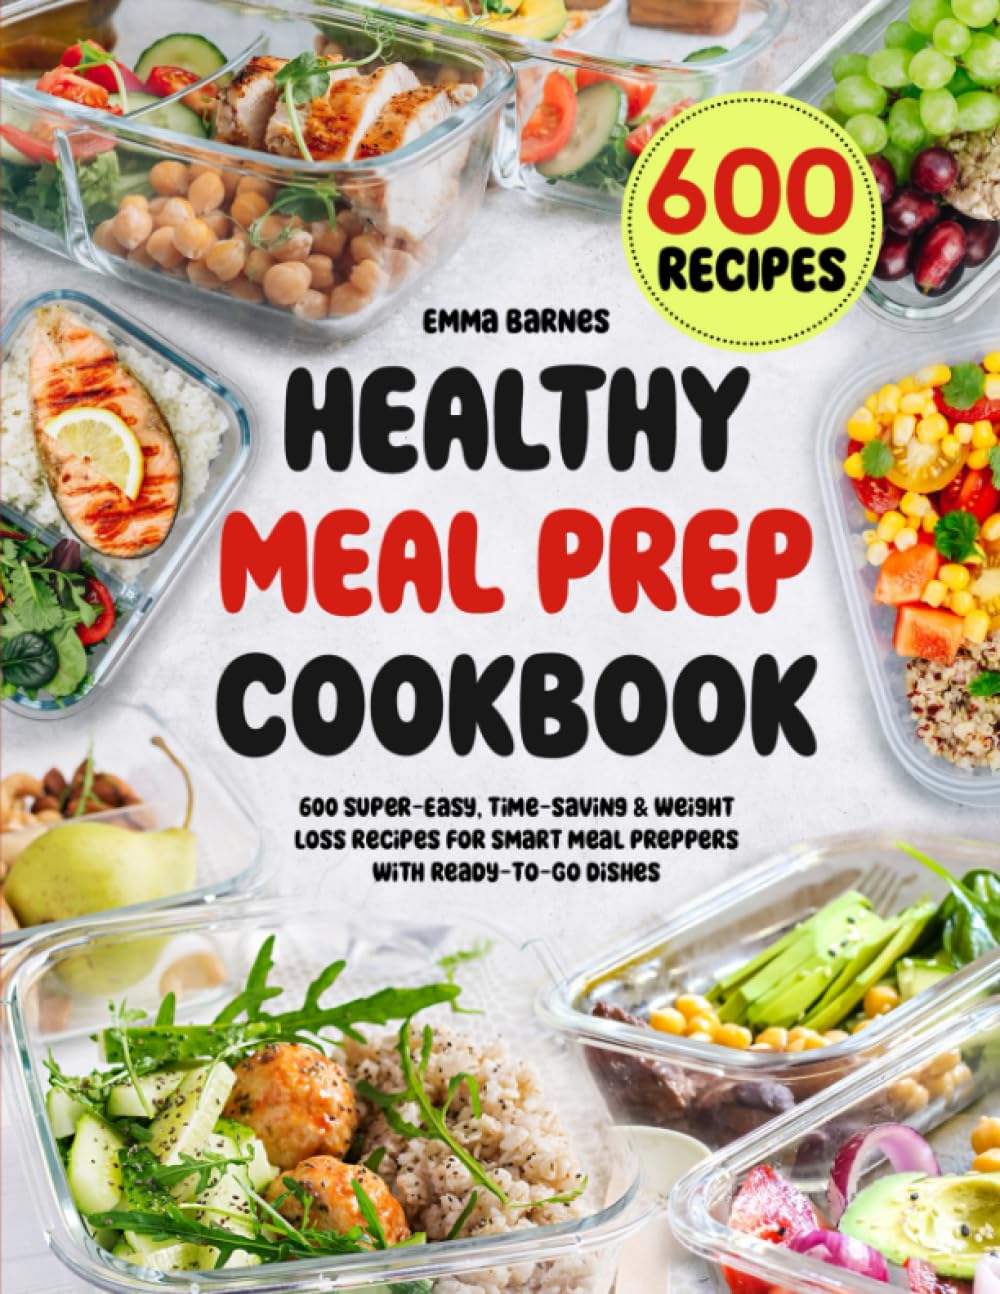 Healthy Meal Prep Cookbook: 600 Super-Easy, Time-Saving & Weight Loss Recipes For Smart Meal Preppers With Ready-To-Go Dishes (Low Carb, Vegetarian, Vegan, Plant Based, and More)